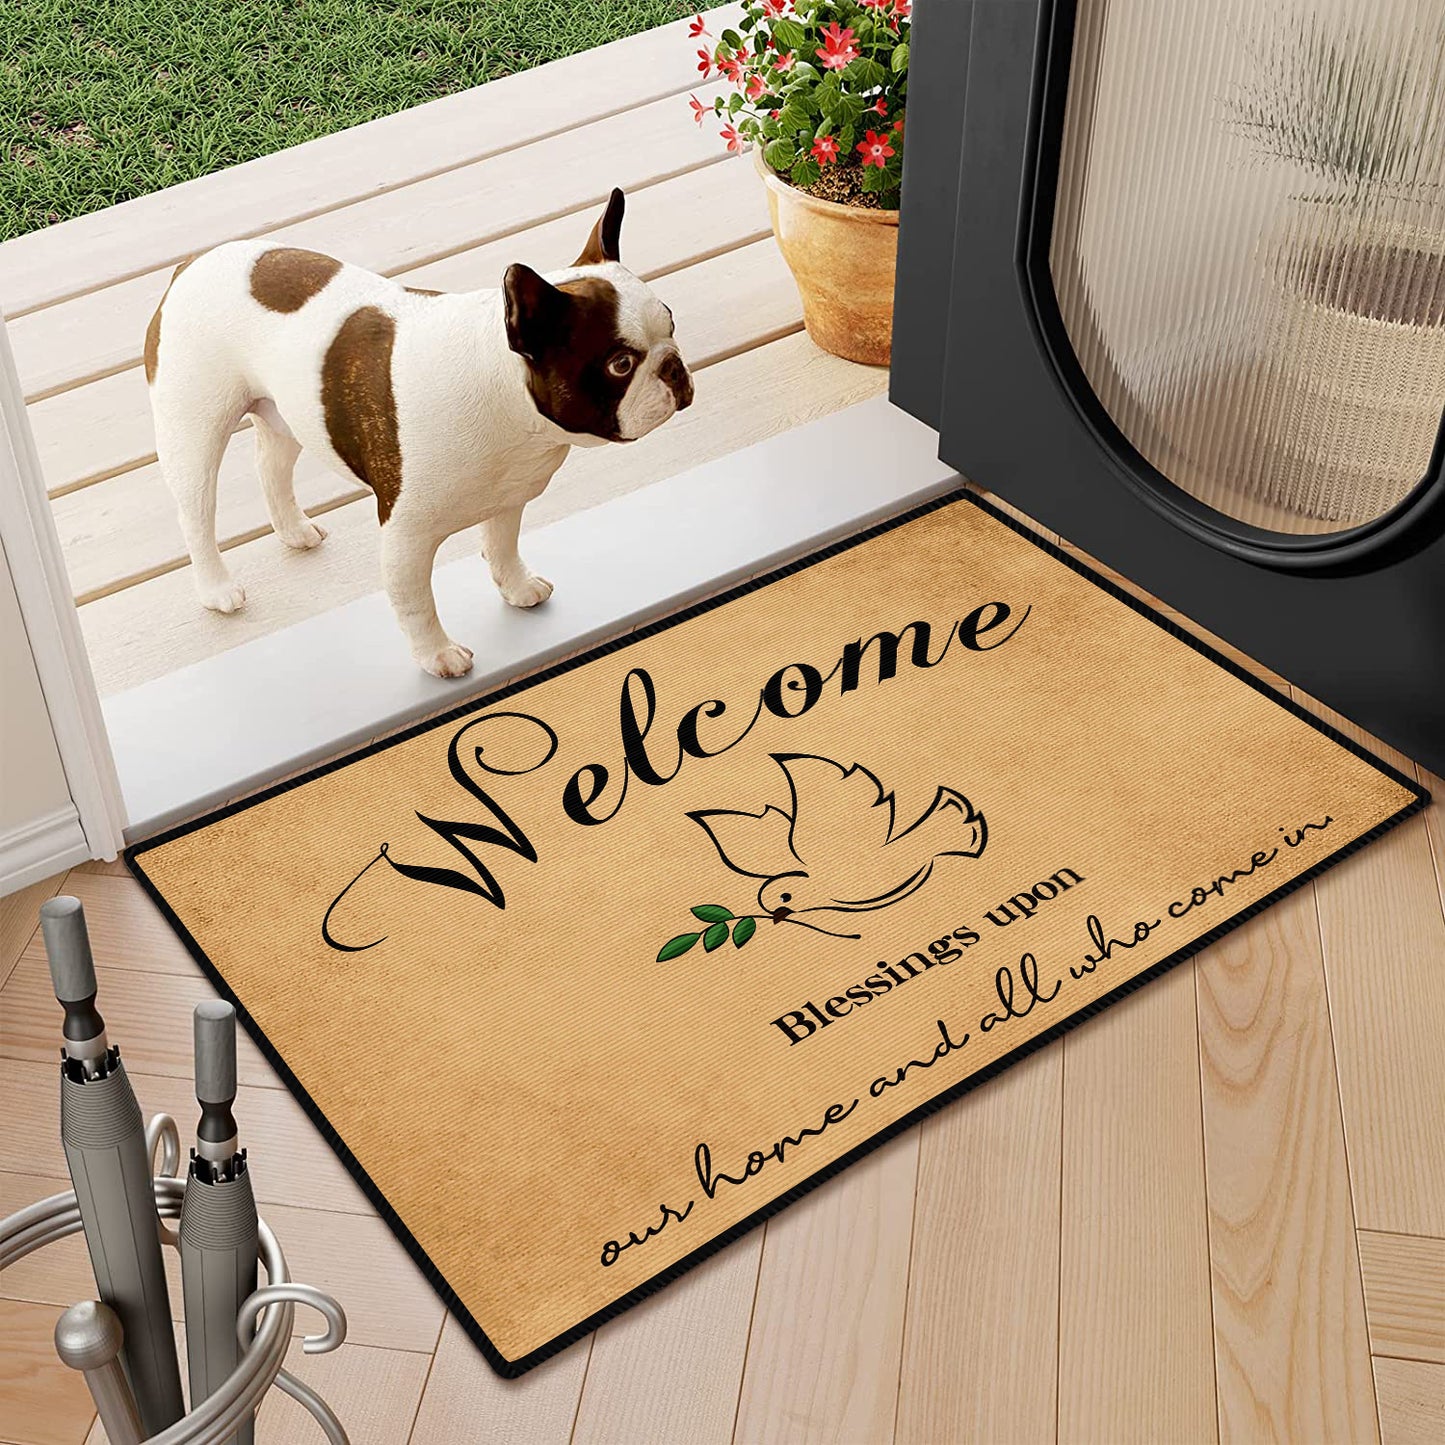 Welcome Blessings Upon Our Home & All Who Come In Christian Welcome Mat claimedbygoddesigns